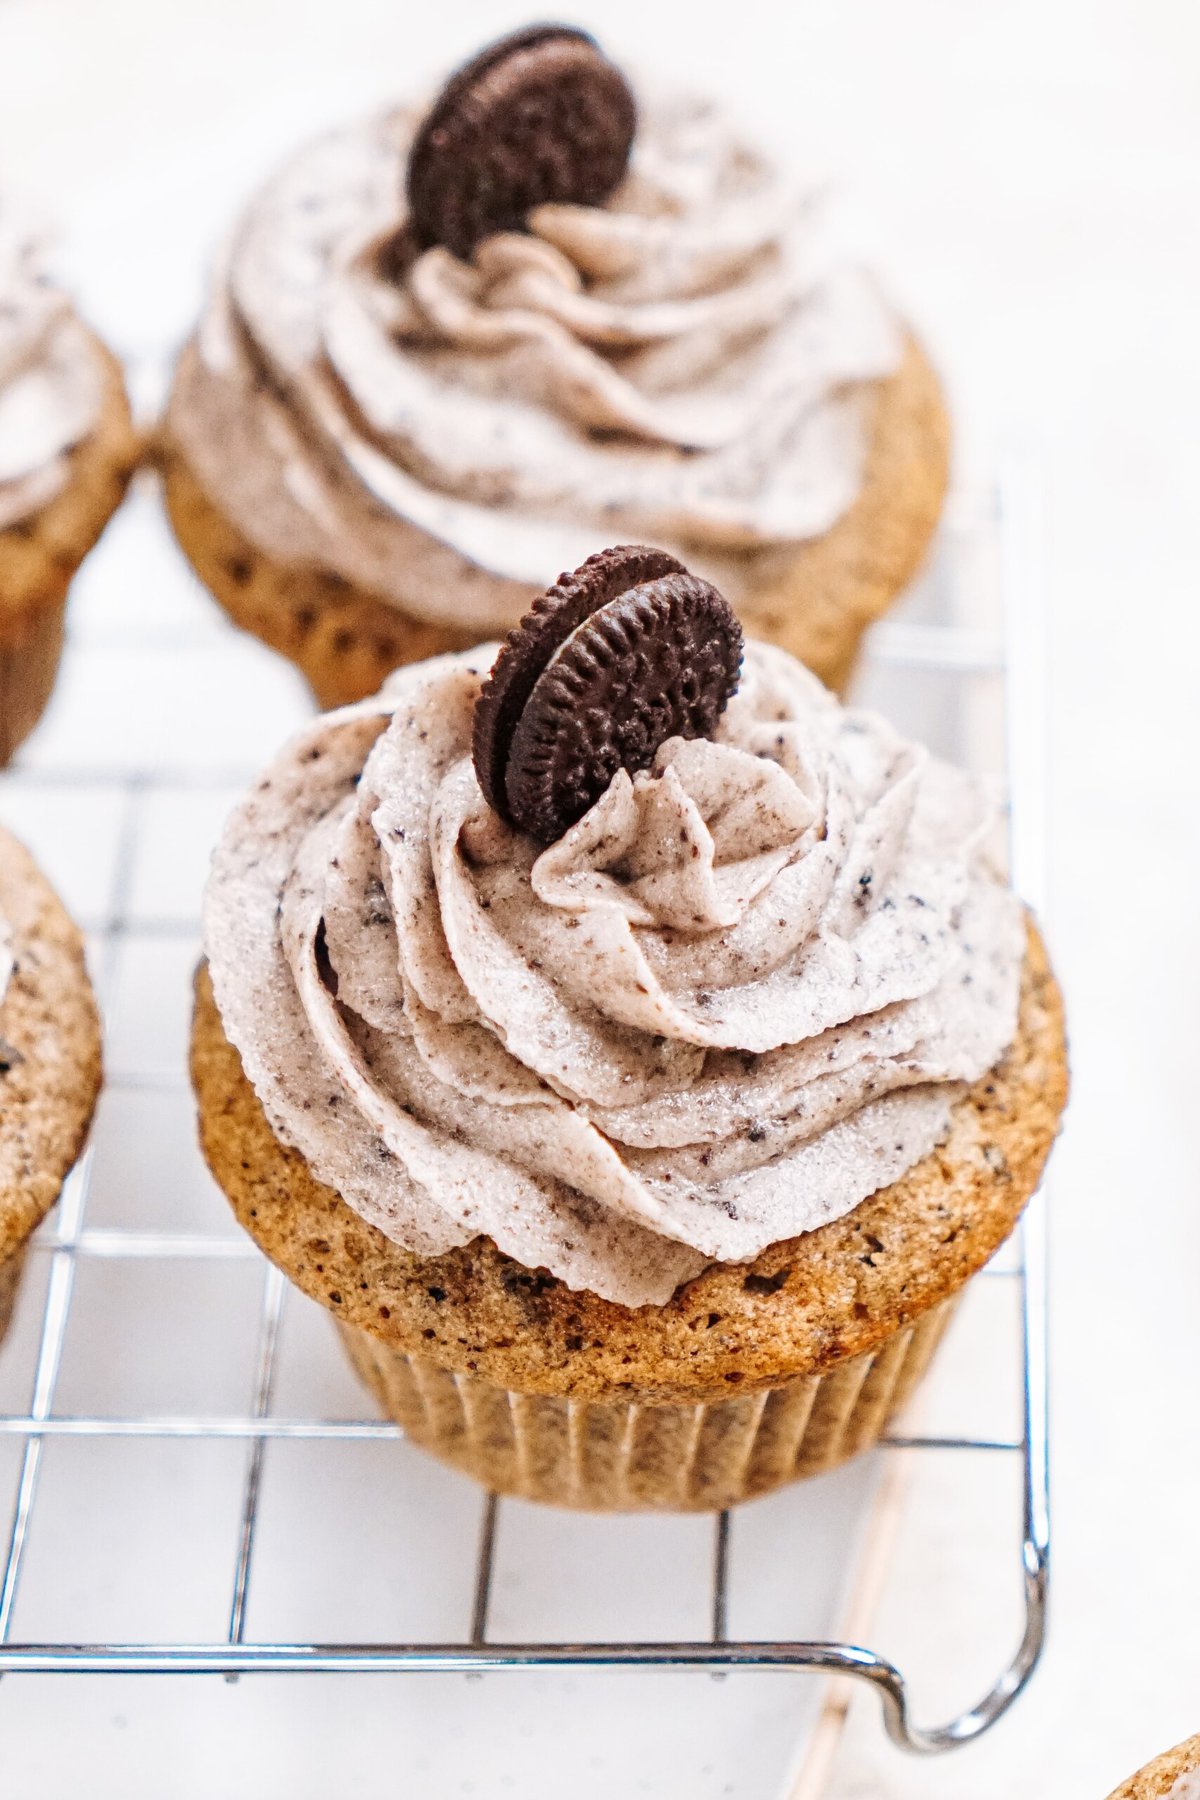 Three cupcakes with swirled cookie and cream frosting, each topped with a mini chocolate sandwich cookie, placed on a cooling rack.